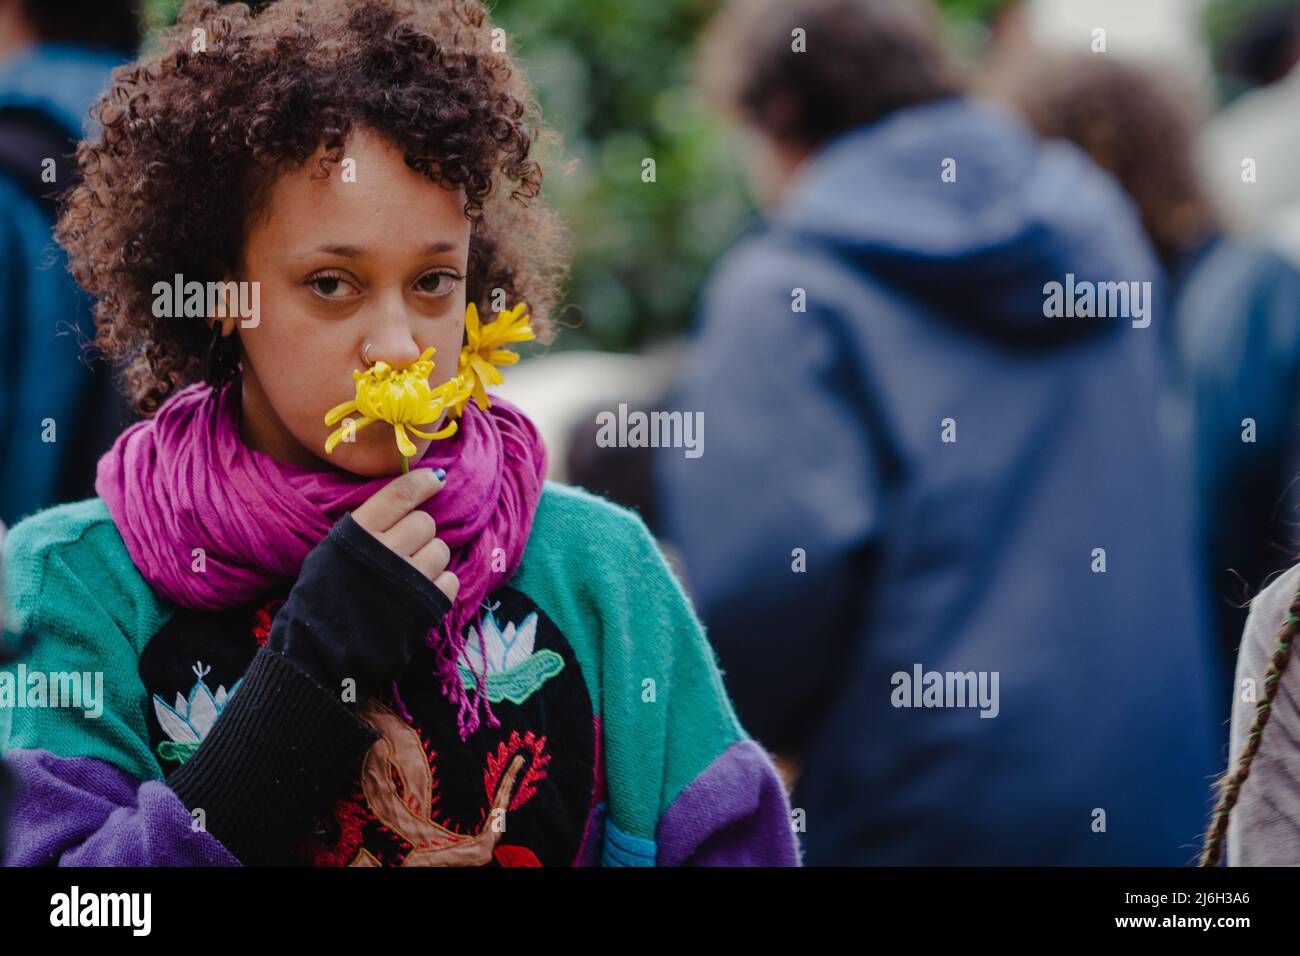 Sao Paulo, Brazil. 28th May, 2011. Woman with a flower in her mouth as demonstrators gather outside Art Museum of Sao Paulo (MASP) during 'Marcha da Liberdade' (Freedom March) along Paulista Avenue in Sao Paulo, Brazil. Despite the prohibition, the demonstrators were concentrated at MASP. After an initial delay the march set-off following talks between police and and leaders of the march, the protest was released to start at 16:00, since there is no apology to drugs. The Freedom March emerged after the police repression that occurred a week earlier, at the 'Marcha da Maconha' (Marijuana March) Stock Photo